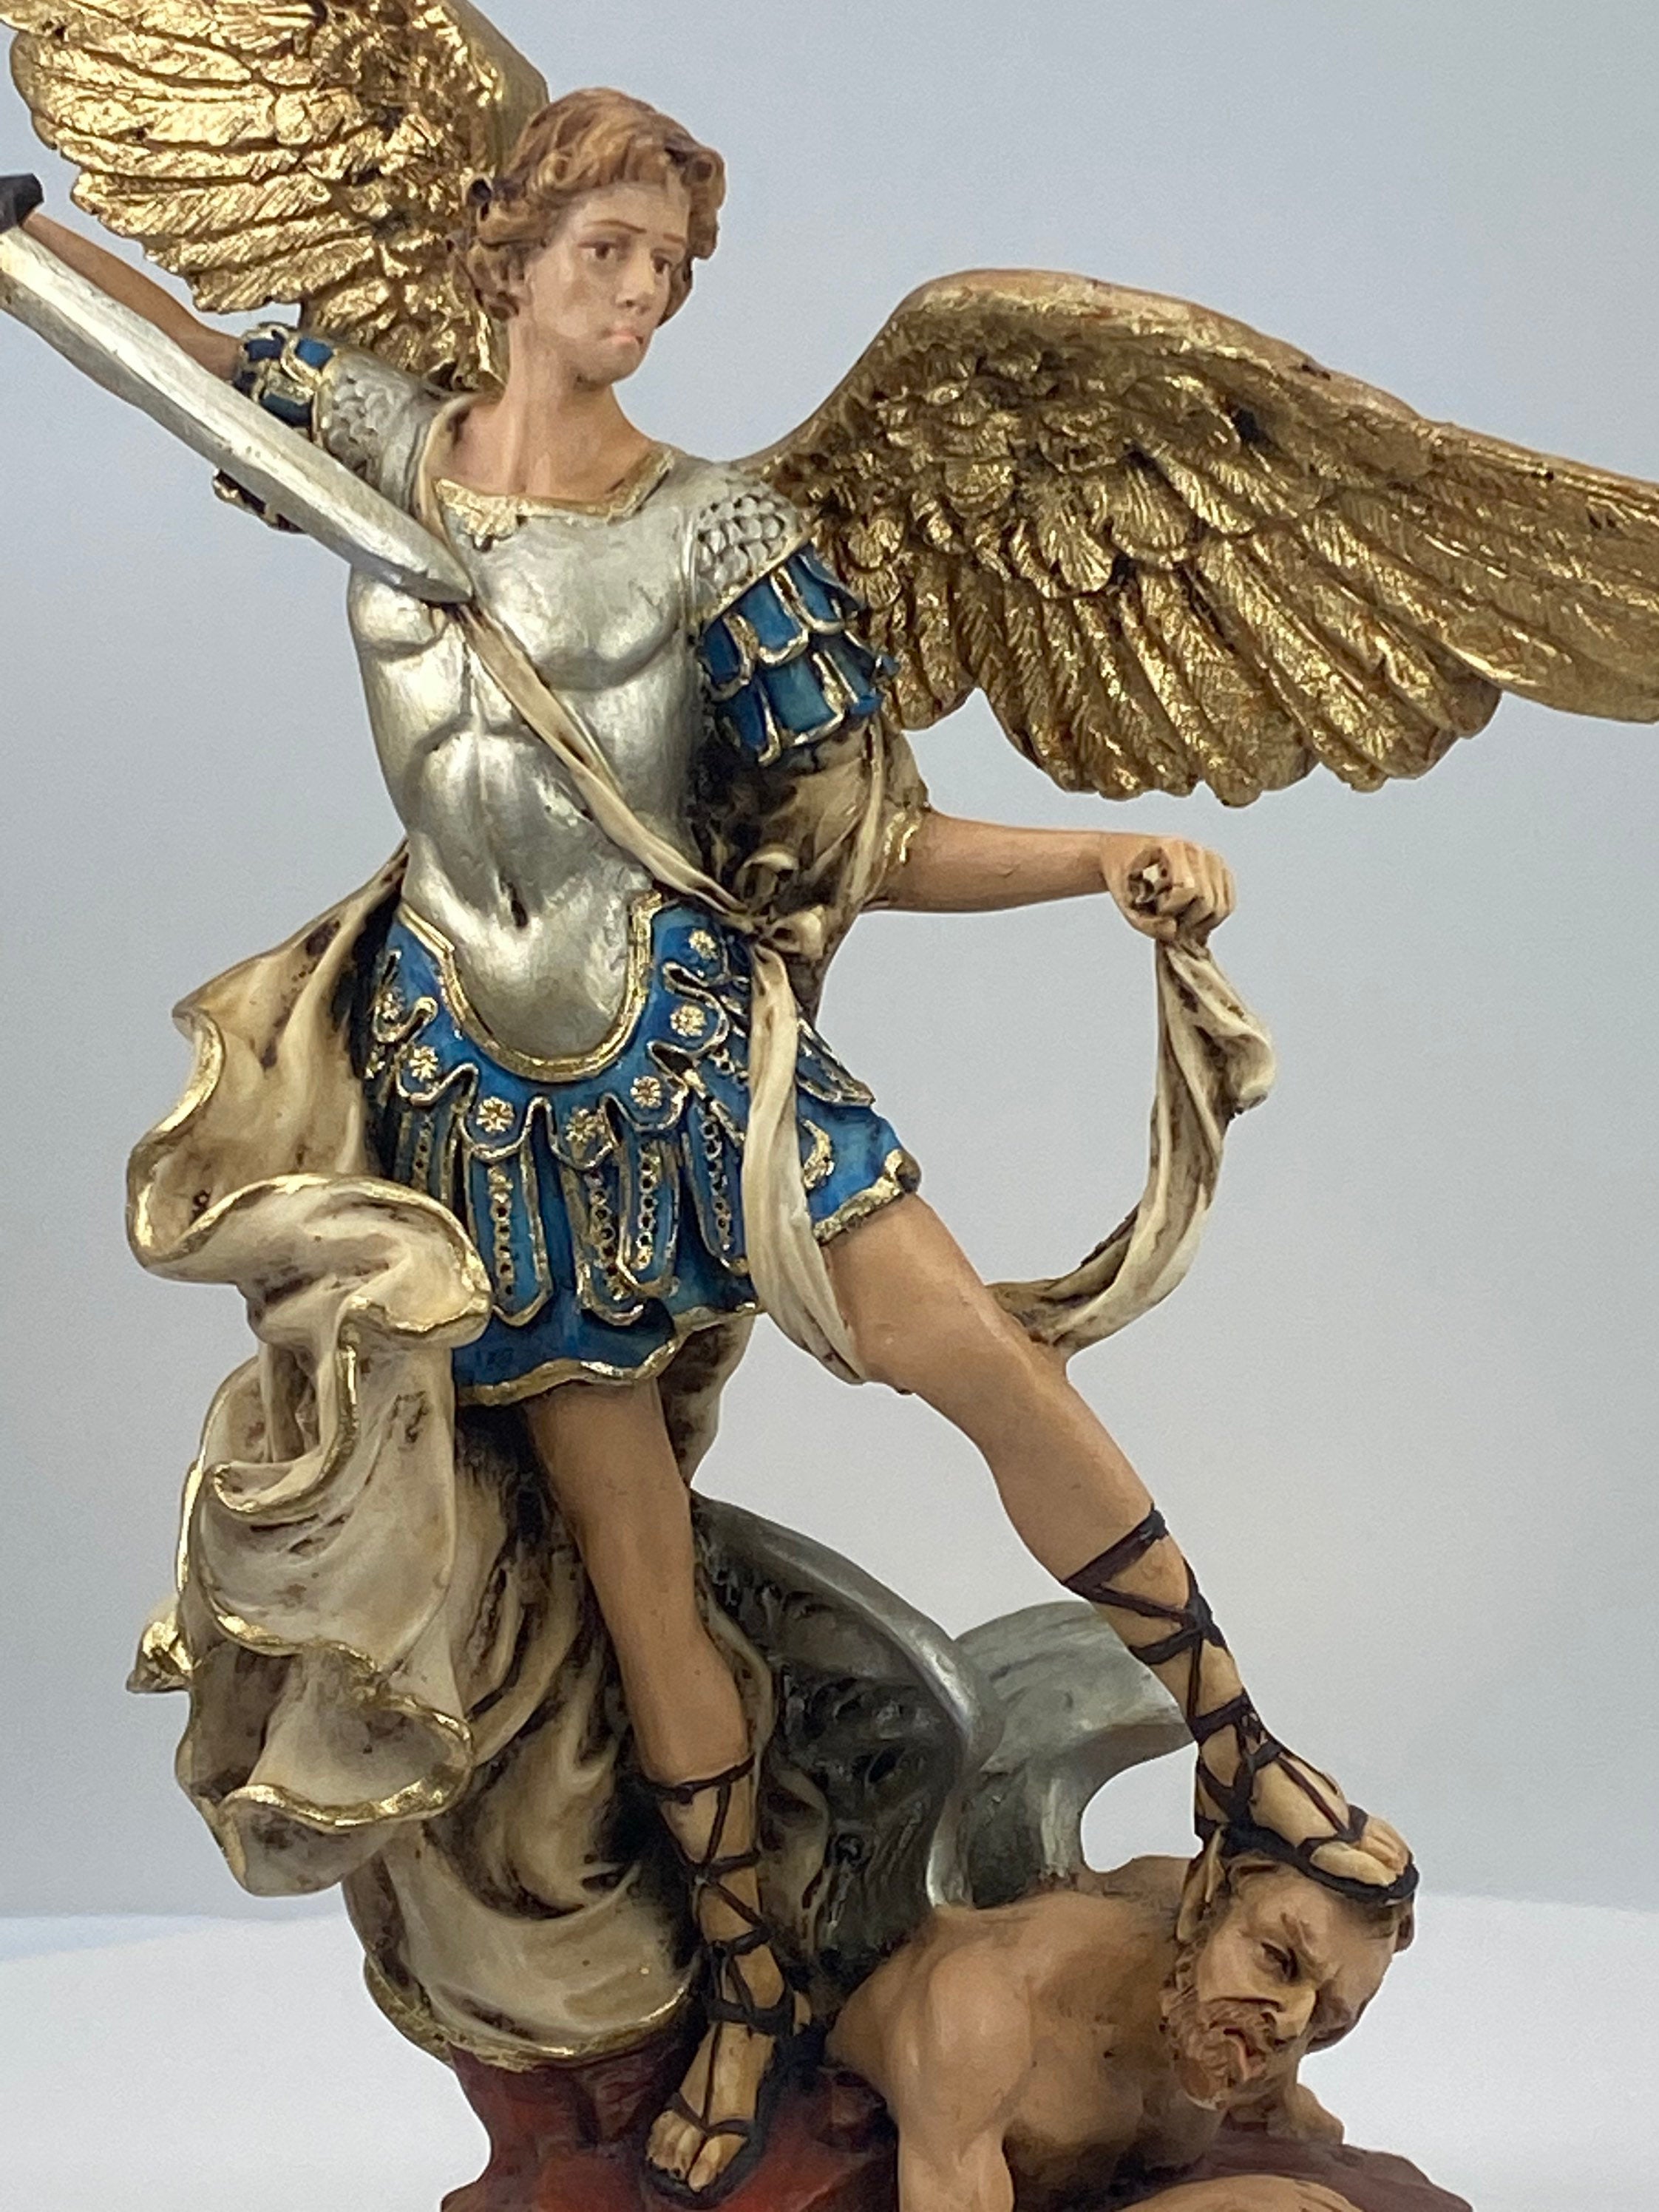 Saint Michael The Archangel by The Faith Gift Shop Collection